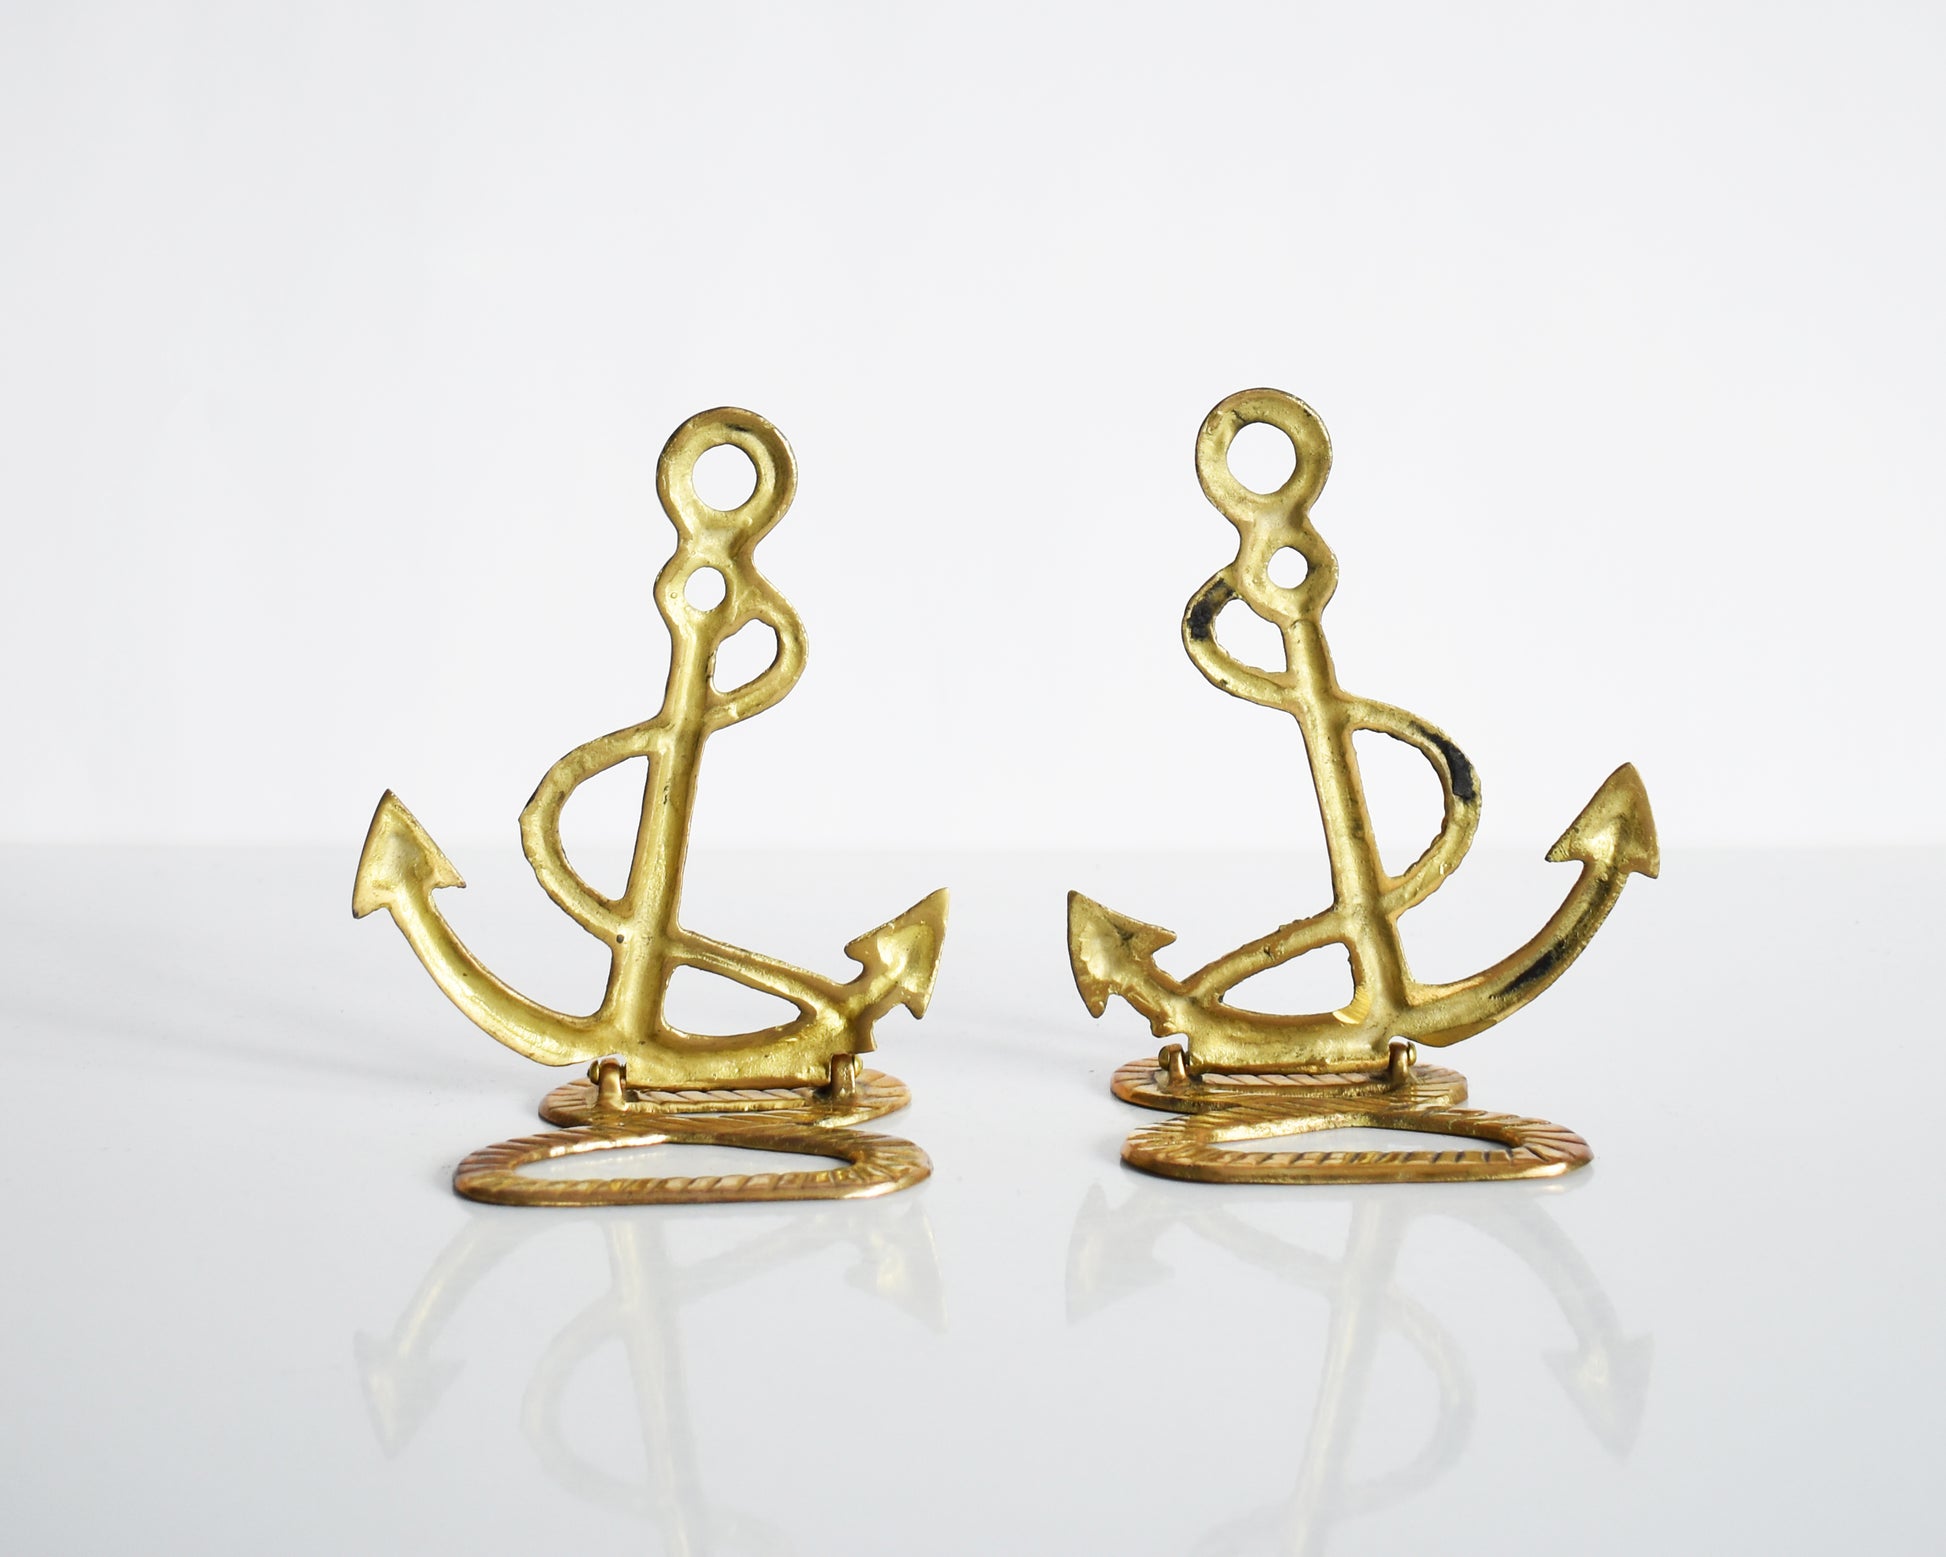 back views of two vintage brass anchor and rope bookends.